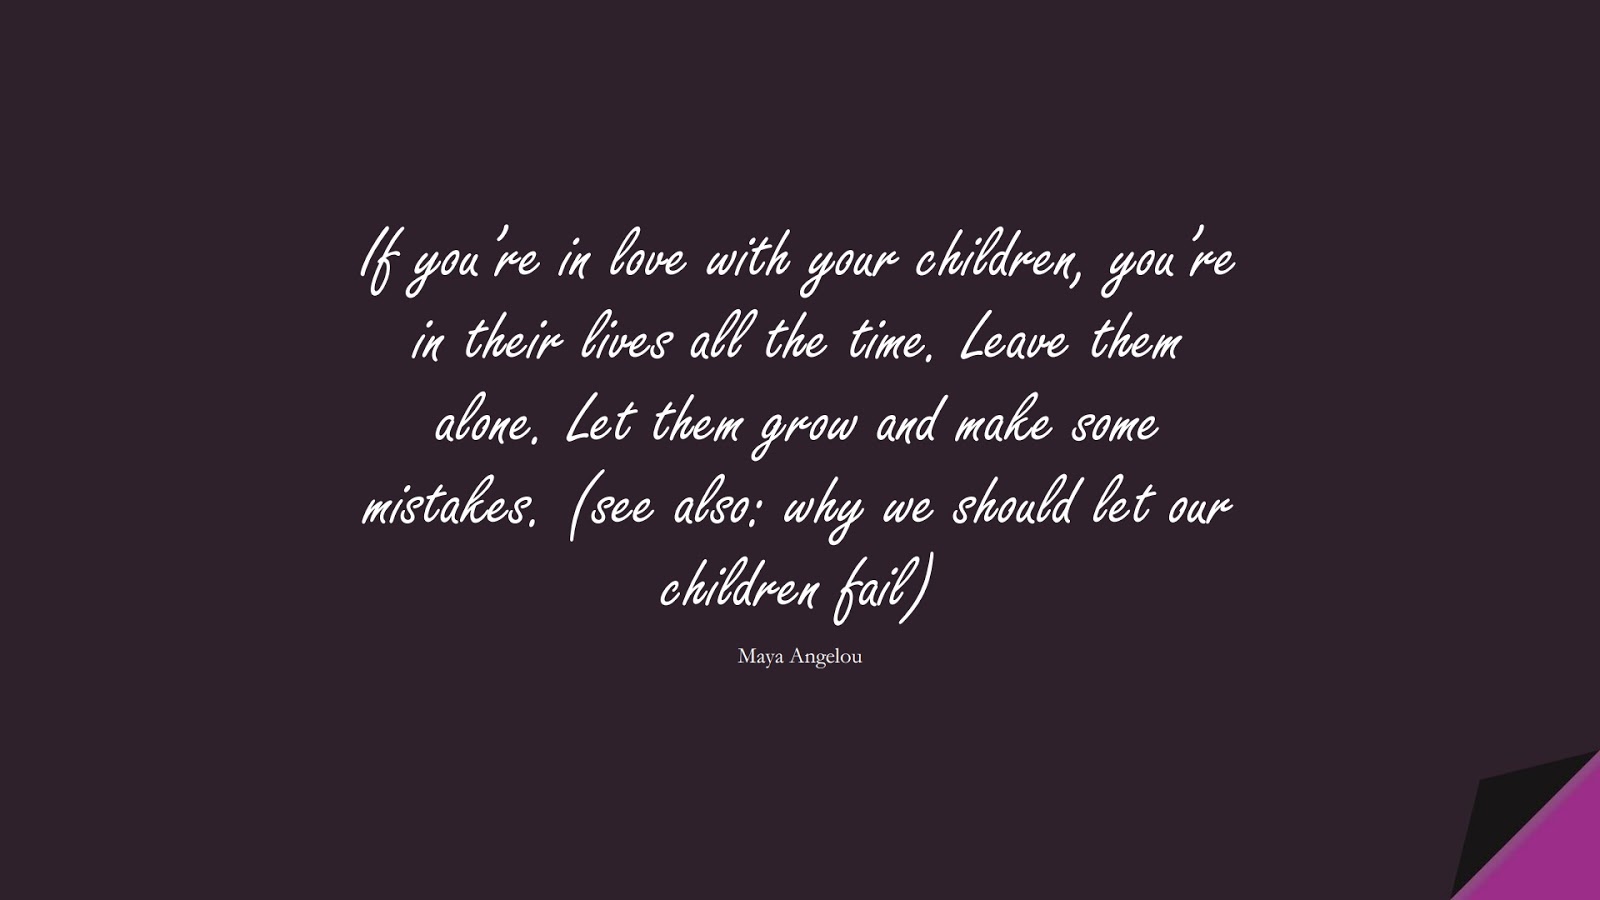 If you’re in love with your children, you’re in their lives all the time. Leave them alone. Let them grow and make some mistakes. (see also: why we should let our children fail) (Maya Angelou);  #MayaAngelouQuotes